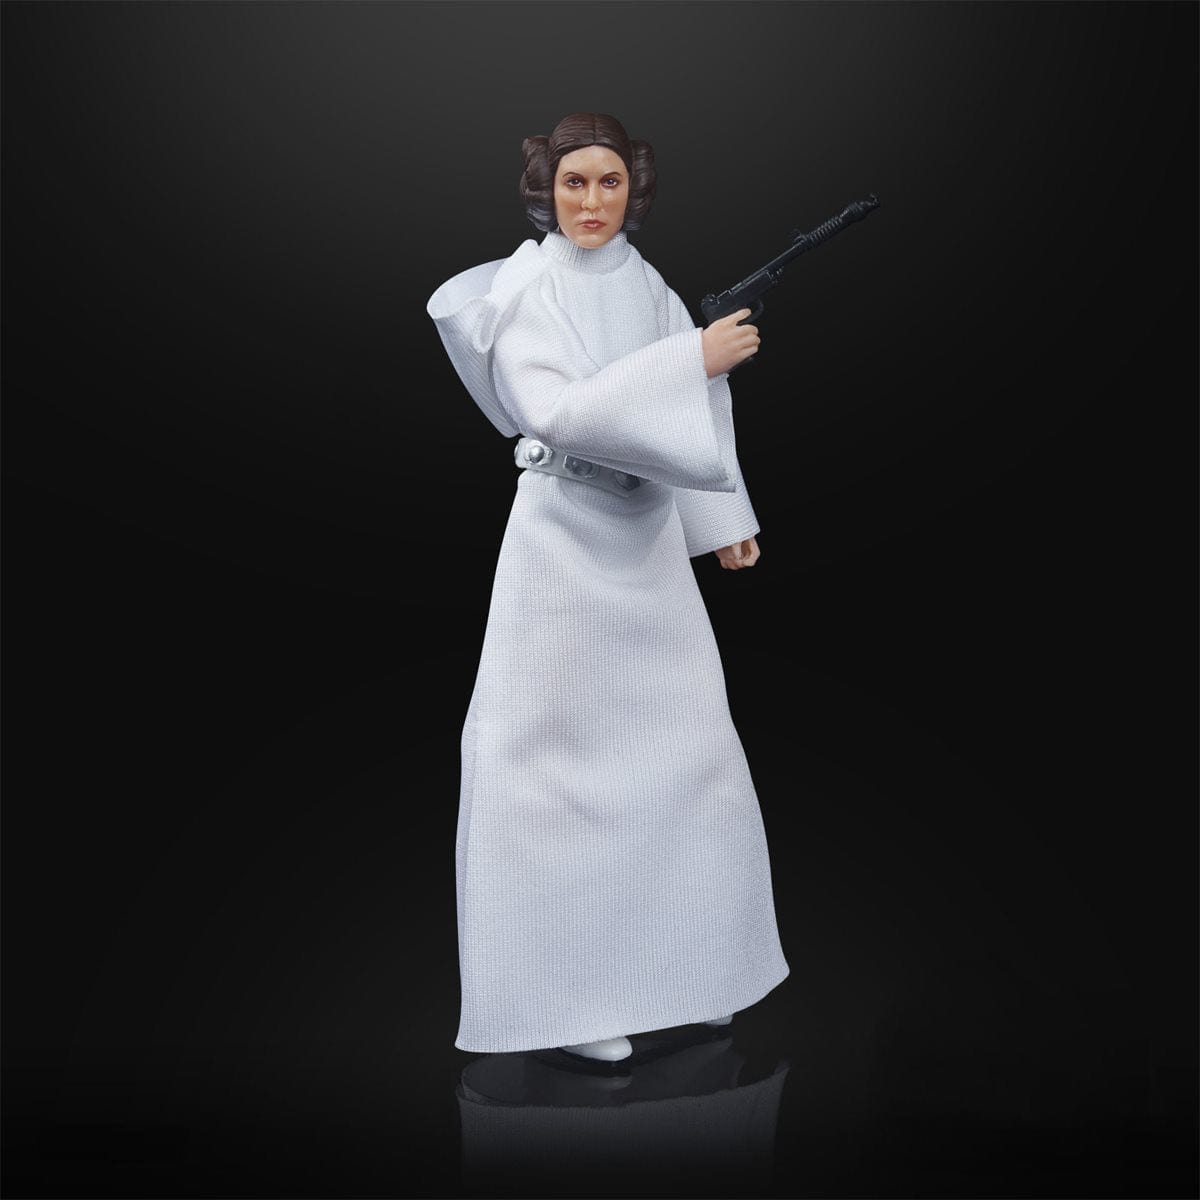 Star Wars The Black Series Archive Princess Leia Organa 6-Inch Action Figure